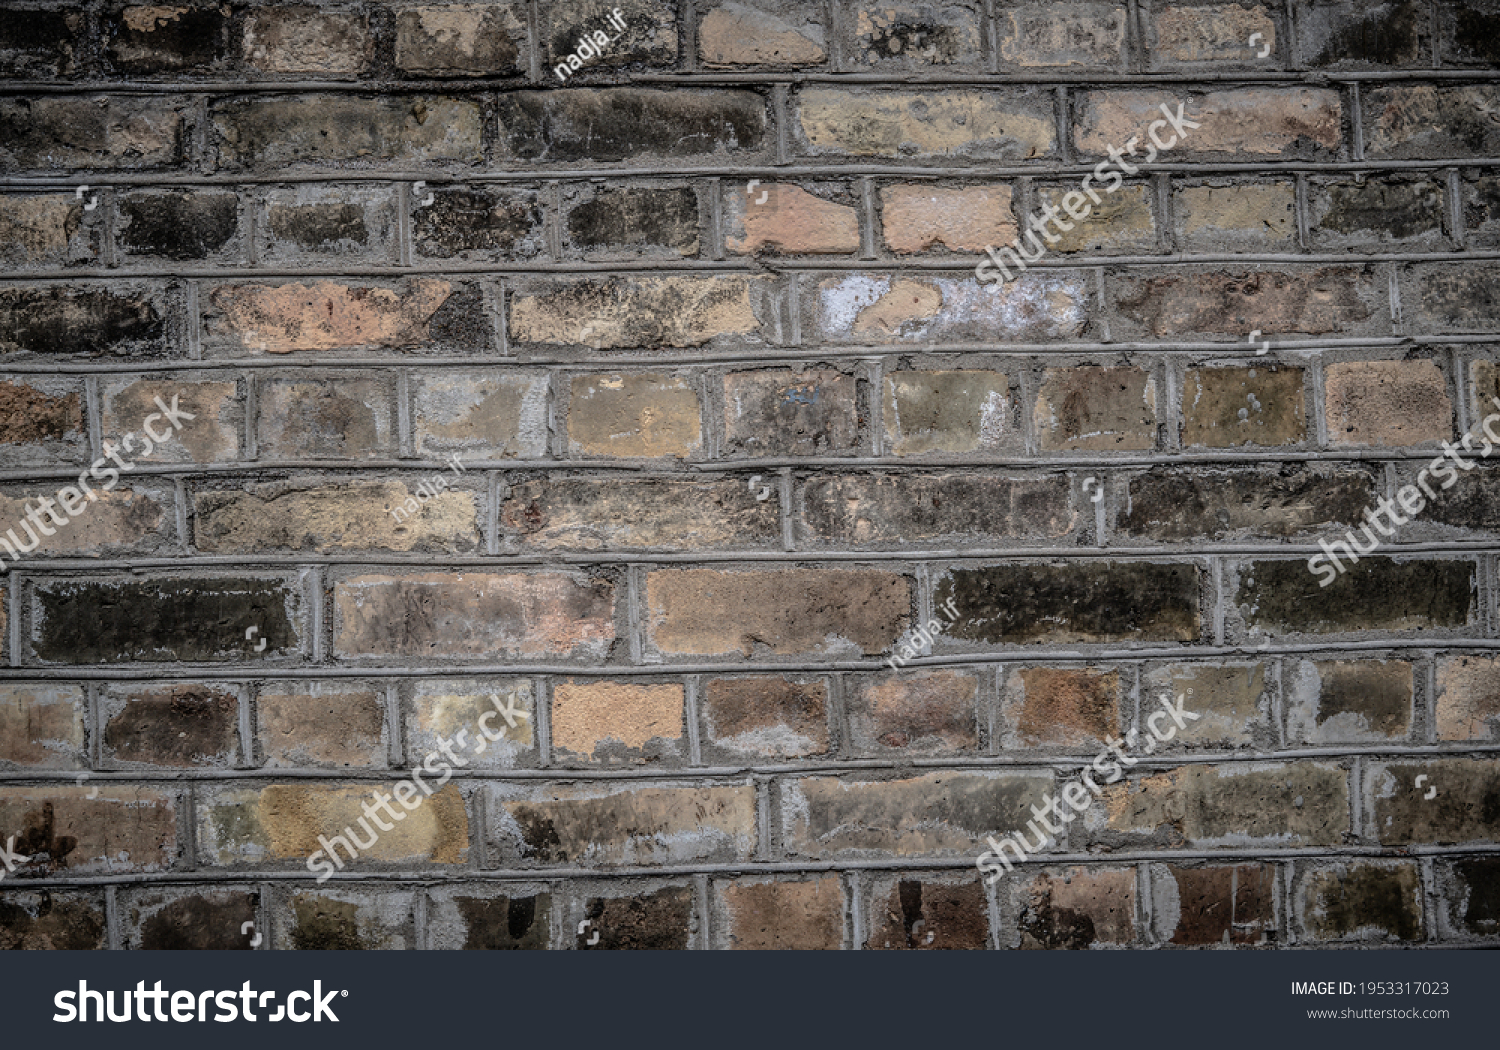 Weathered texture of stained old dark brown and red brick wall background, grungy rusty blocks of stone-work technology, colorful horizontal architecture #1953317023